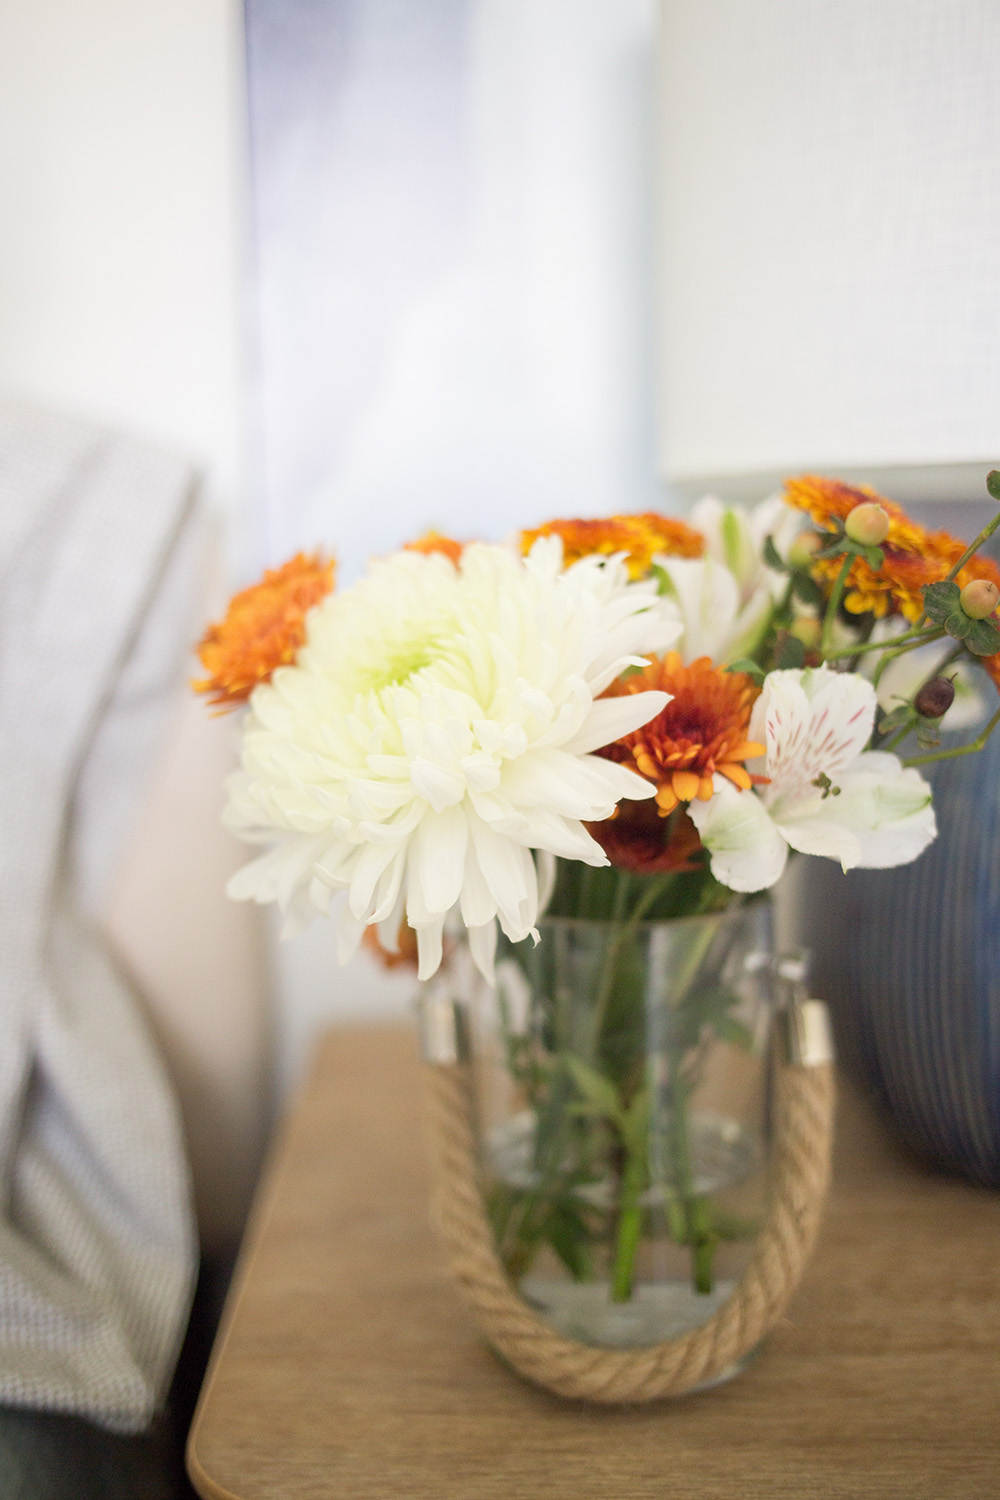 A vase full of fresh flowers sitting on a nightstand.